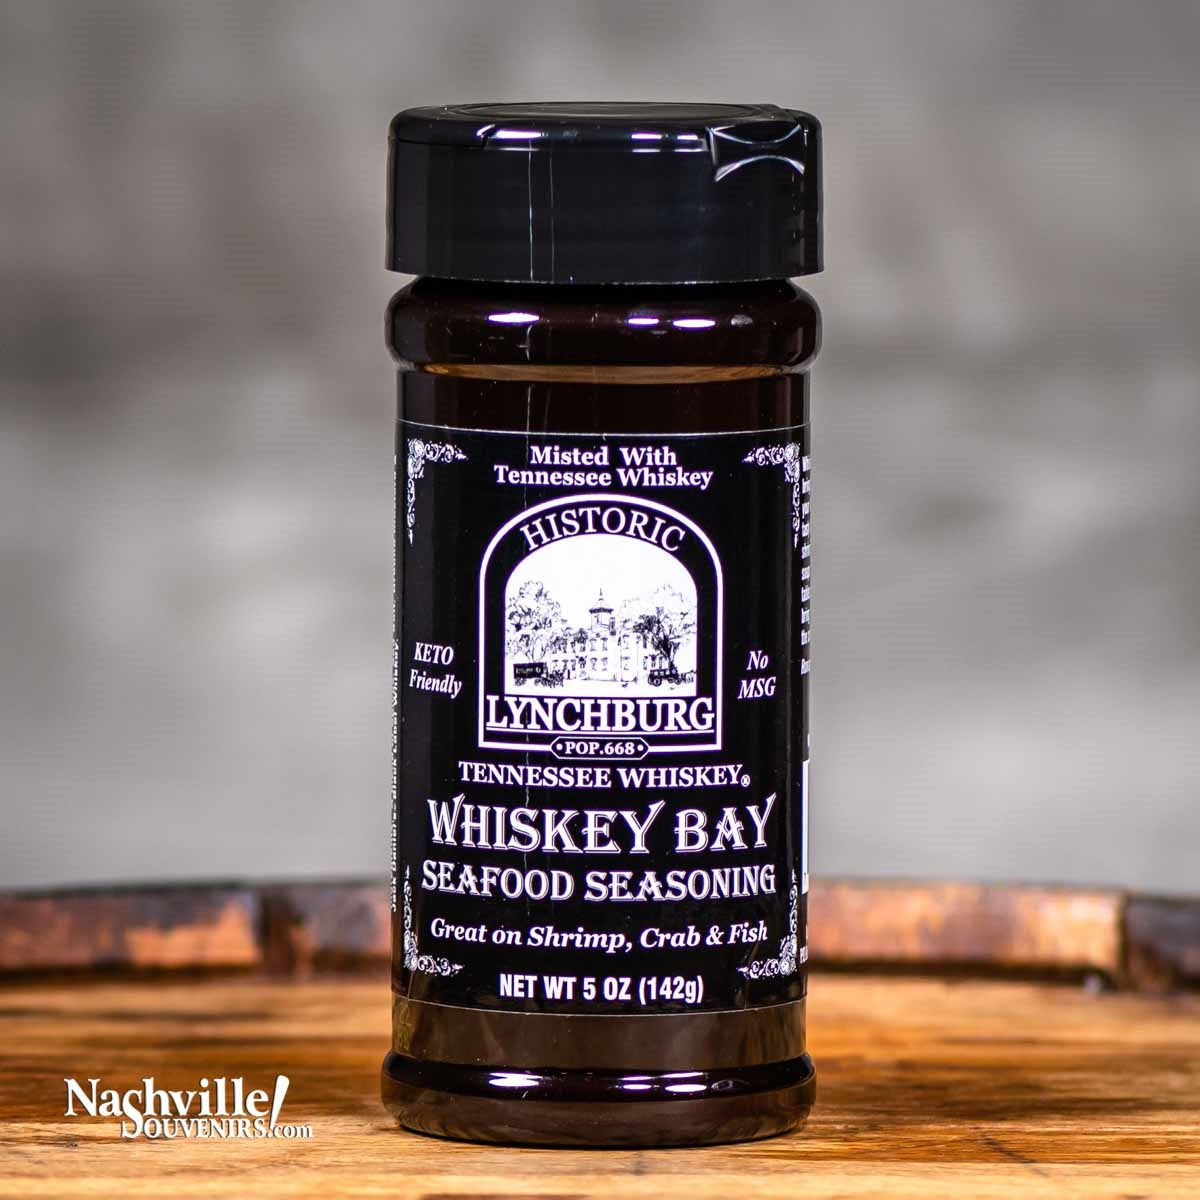 "Jack Up" your spice rack with this great new Historic Lynchburg Whiskey Bay Seasoning containing real Jack Daniels Black Label whiskey. Do your seafood right! FREE SHIPPING on all US orders over $75!